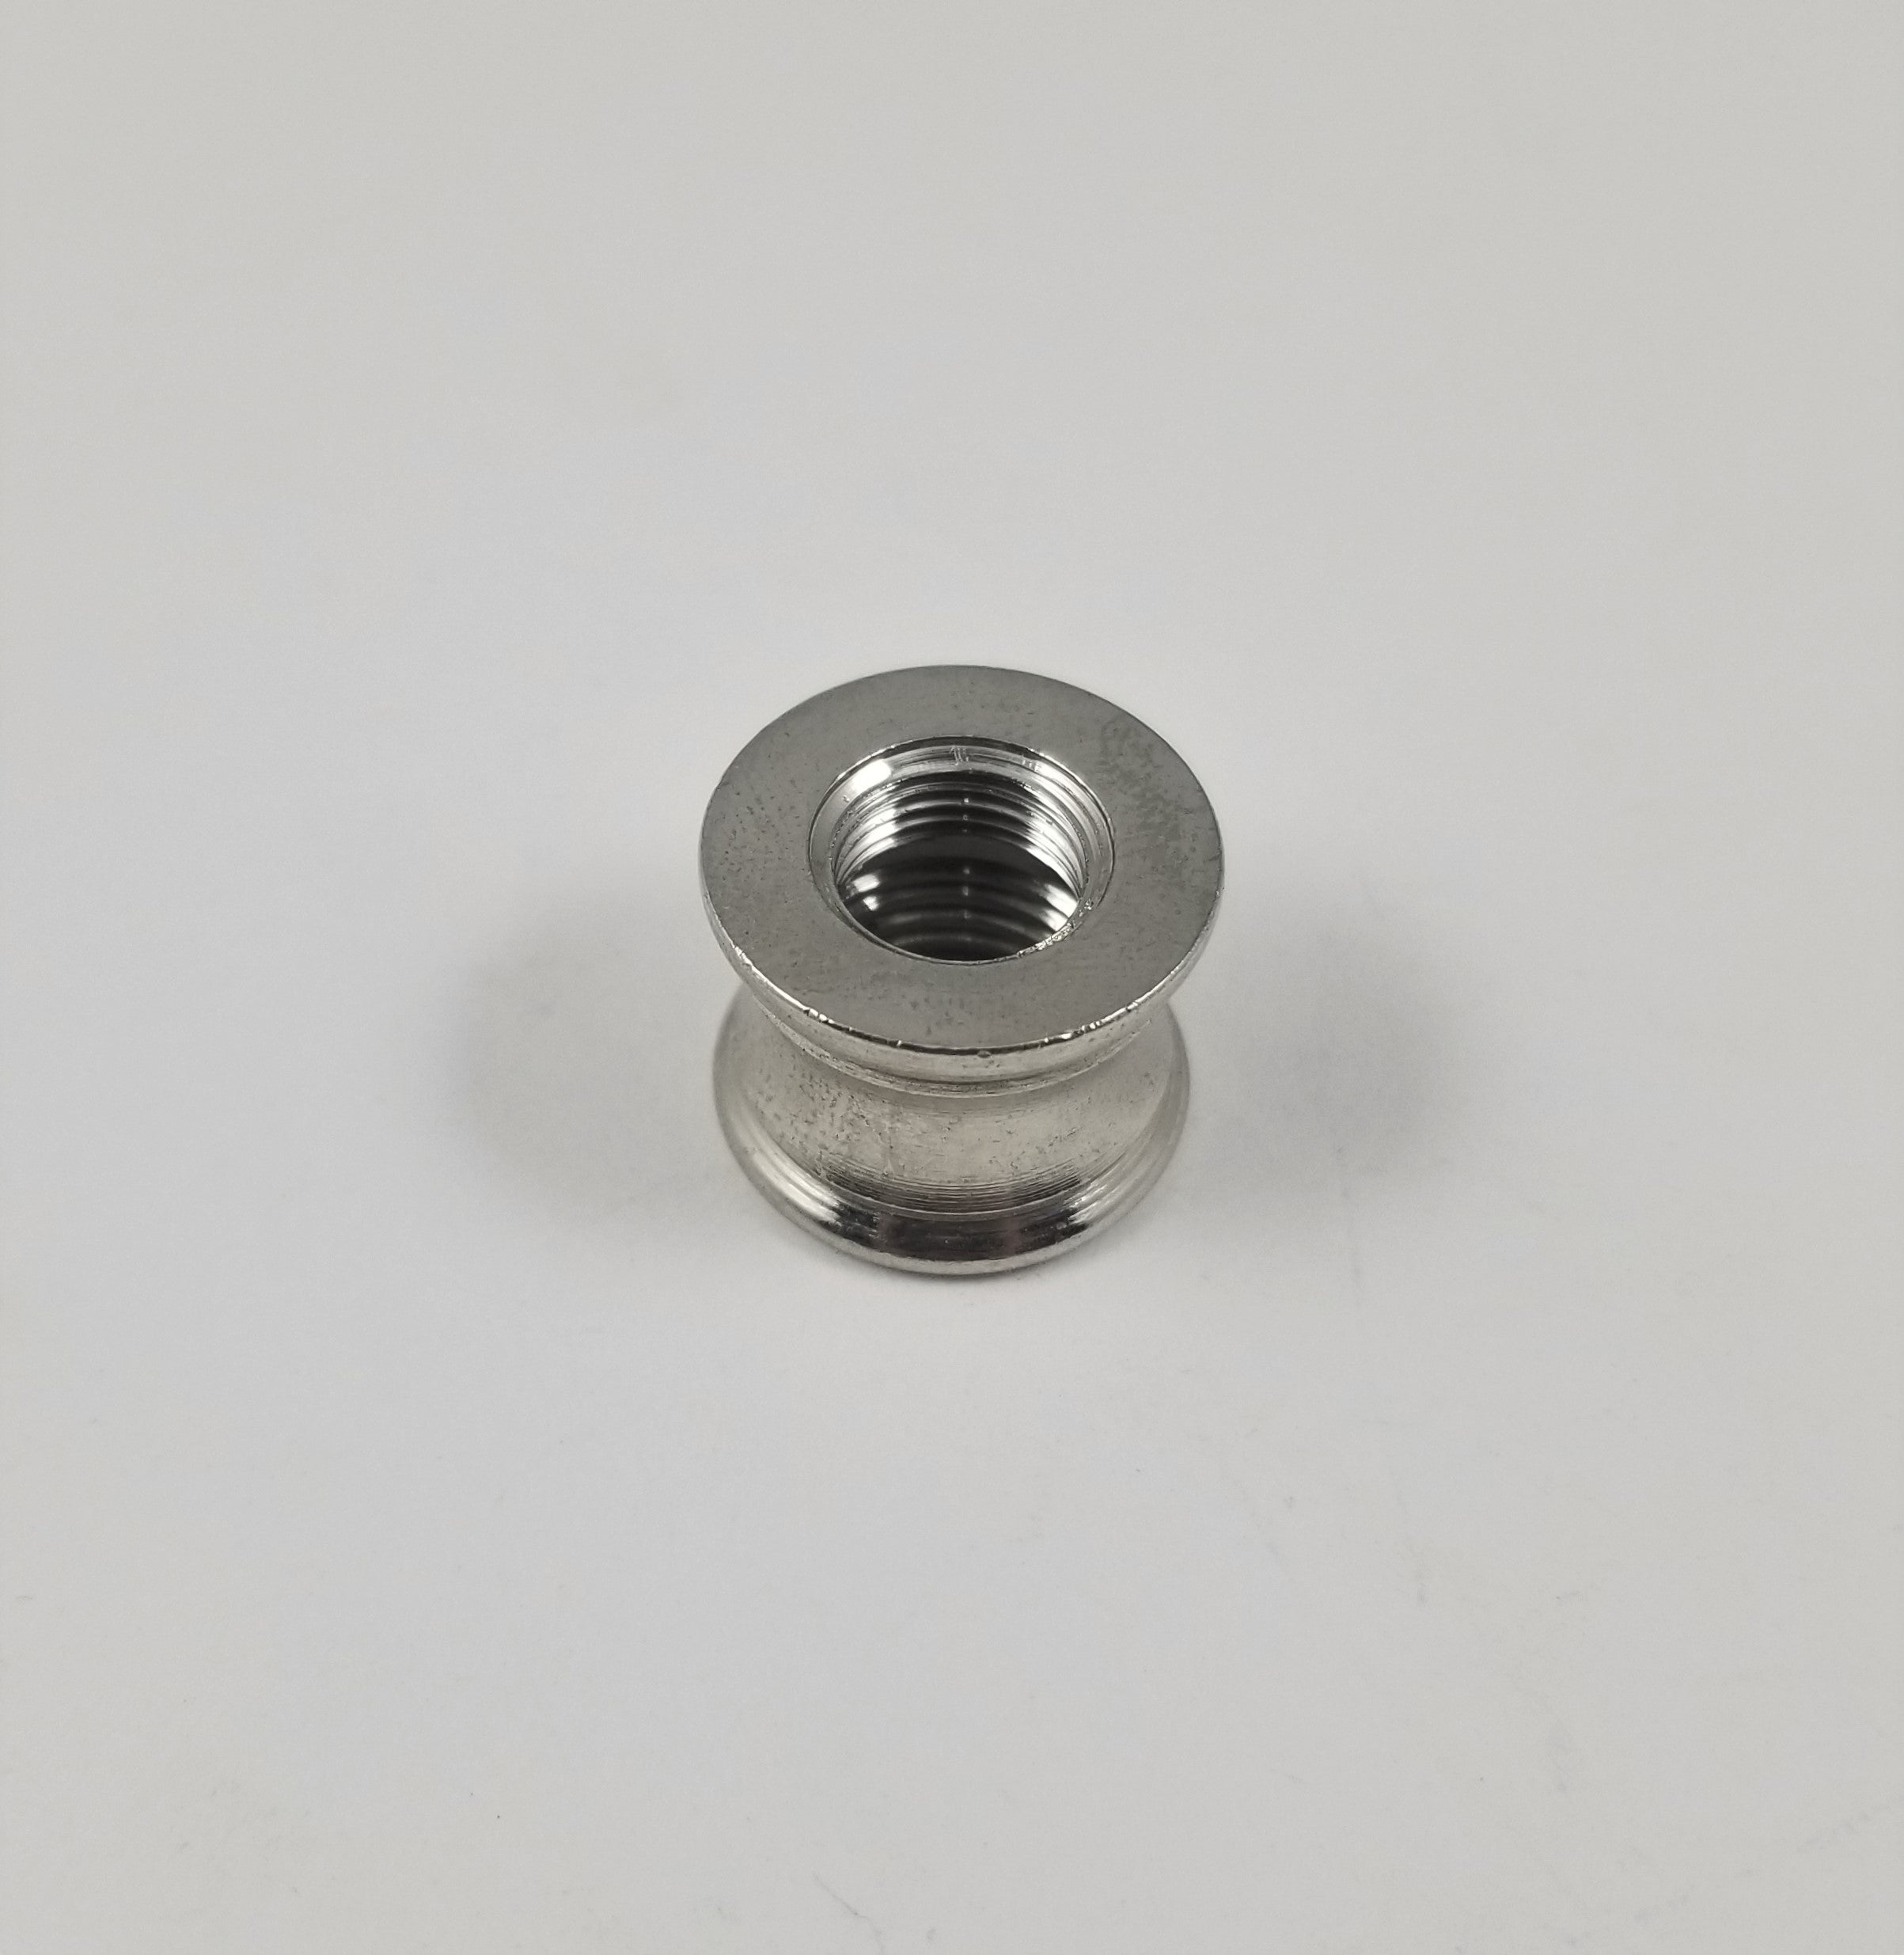 Chrome Plated Coupling - Tapped 1/8 IP F x 1/4 IP F